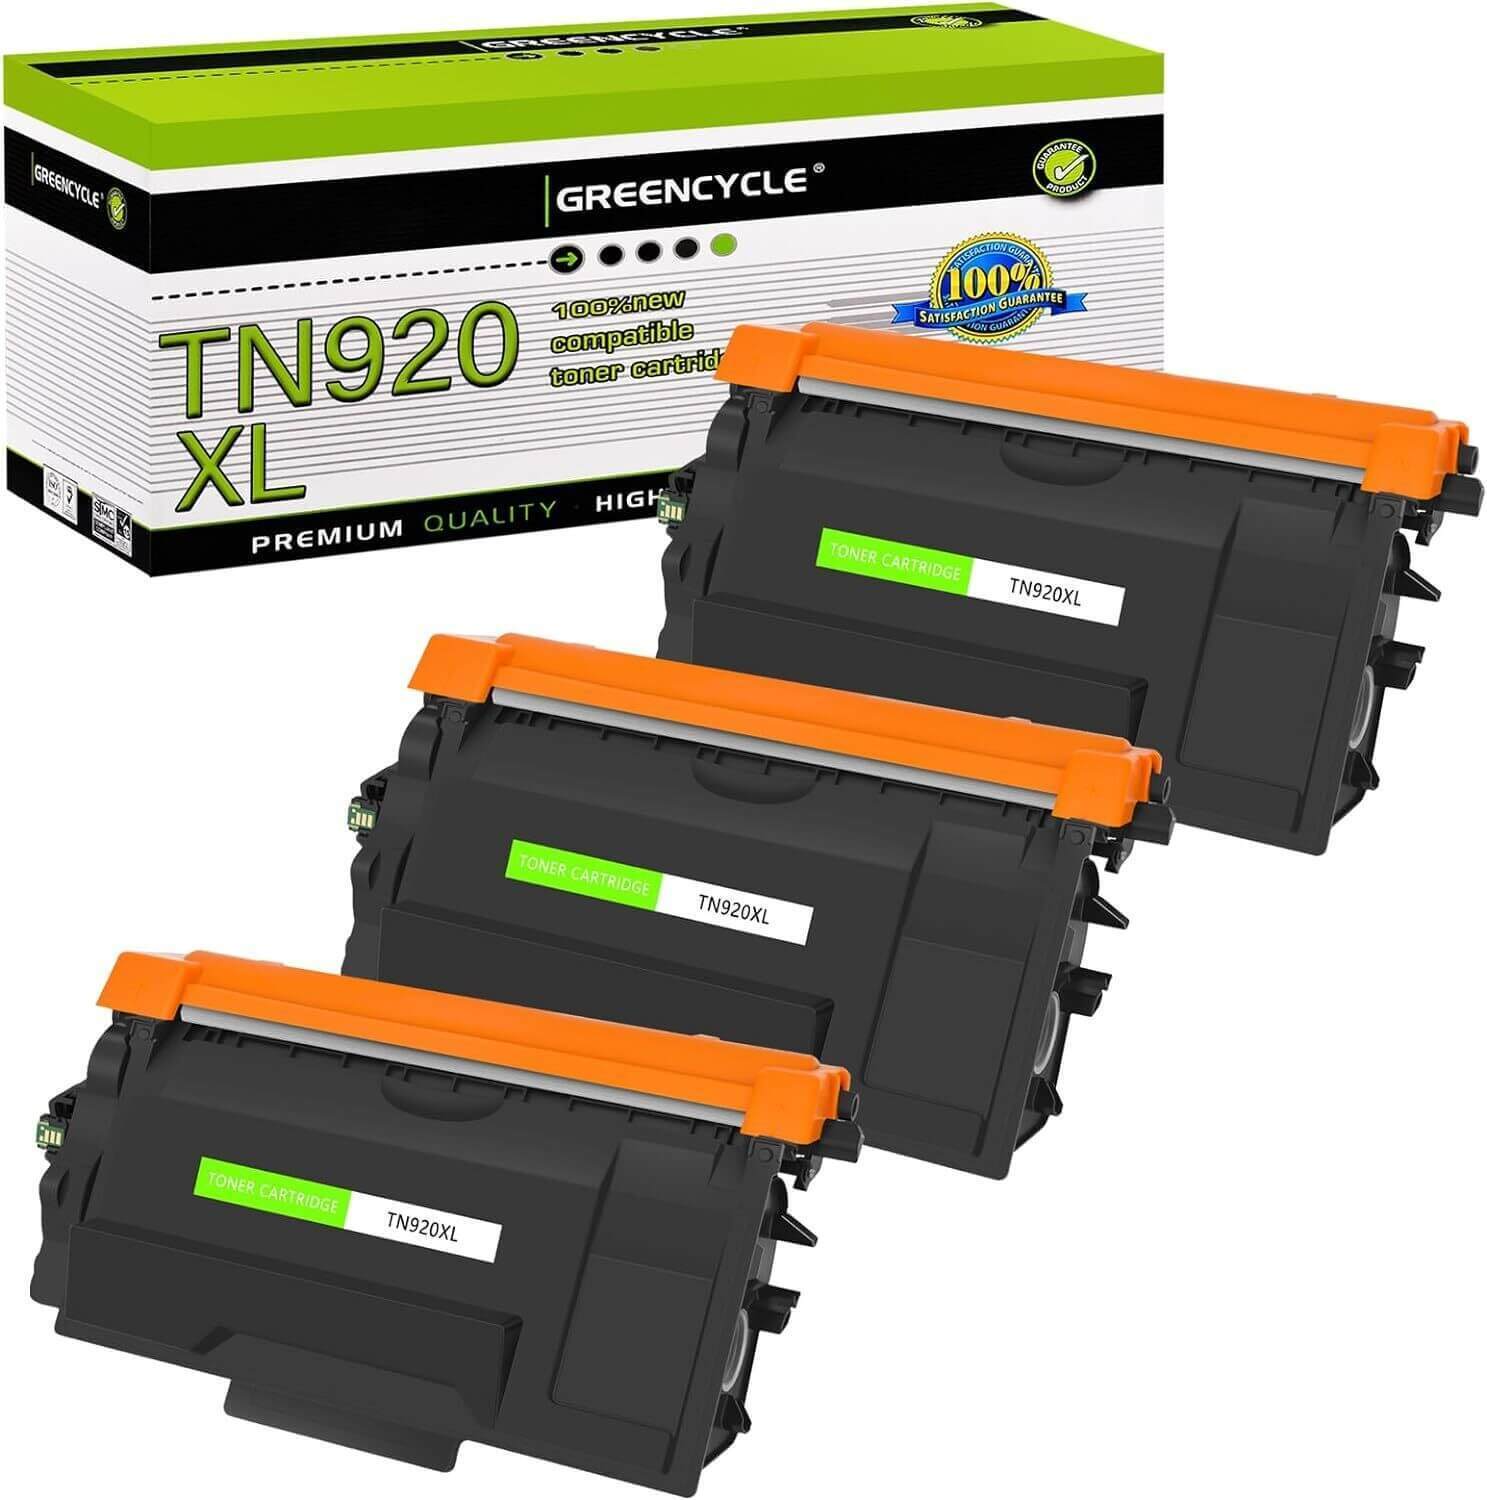 TN920XL High Yield Black Toner Compatible for Brother HL-L6310DW MFC-L6810DW 3PK